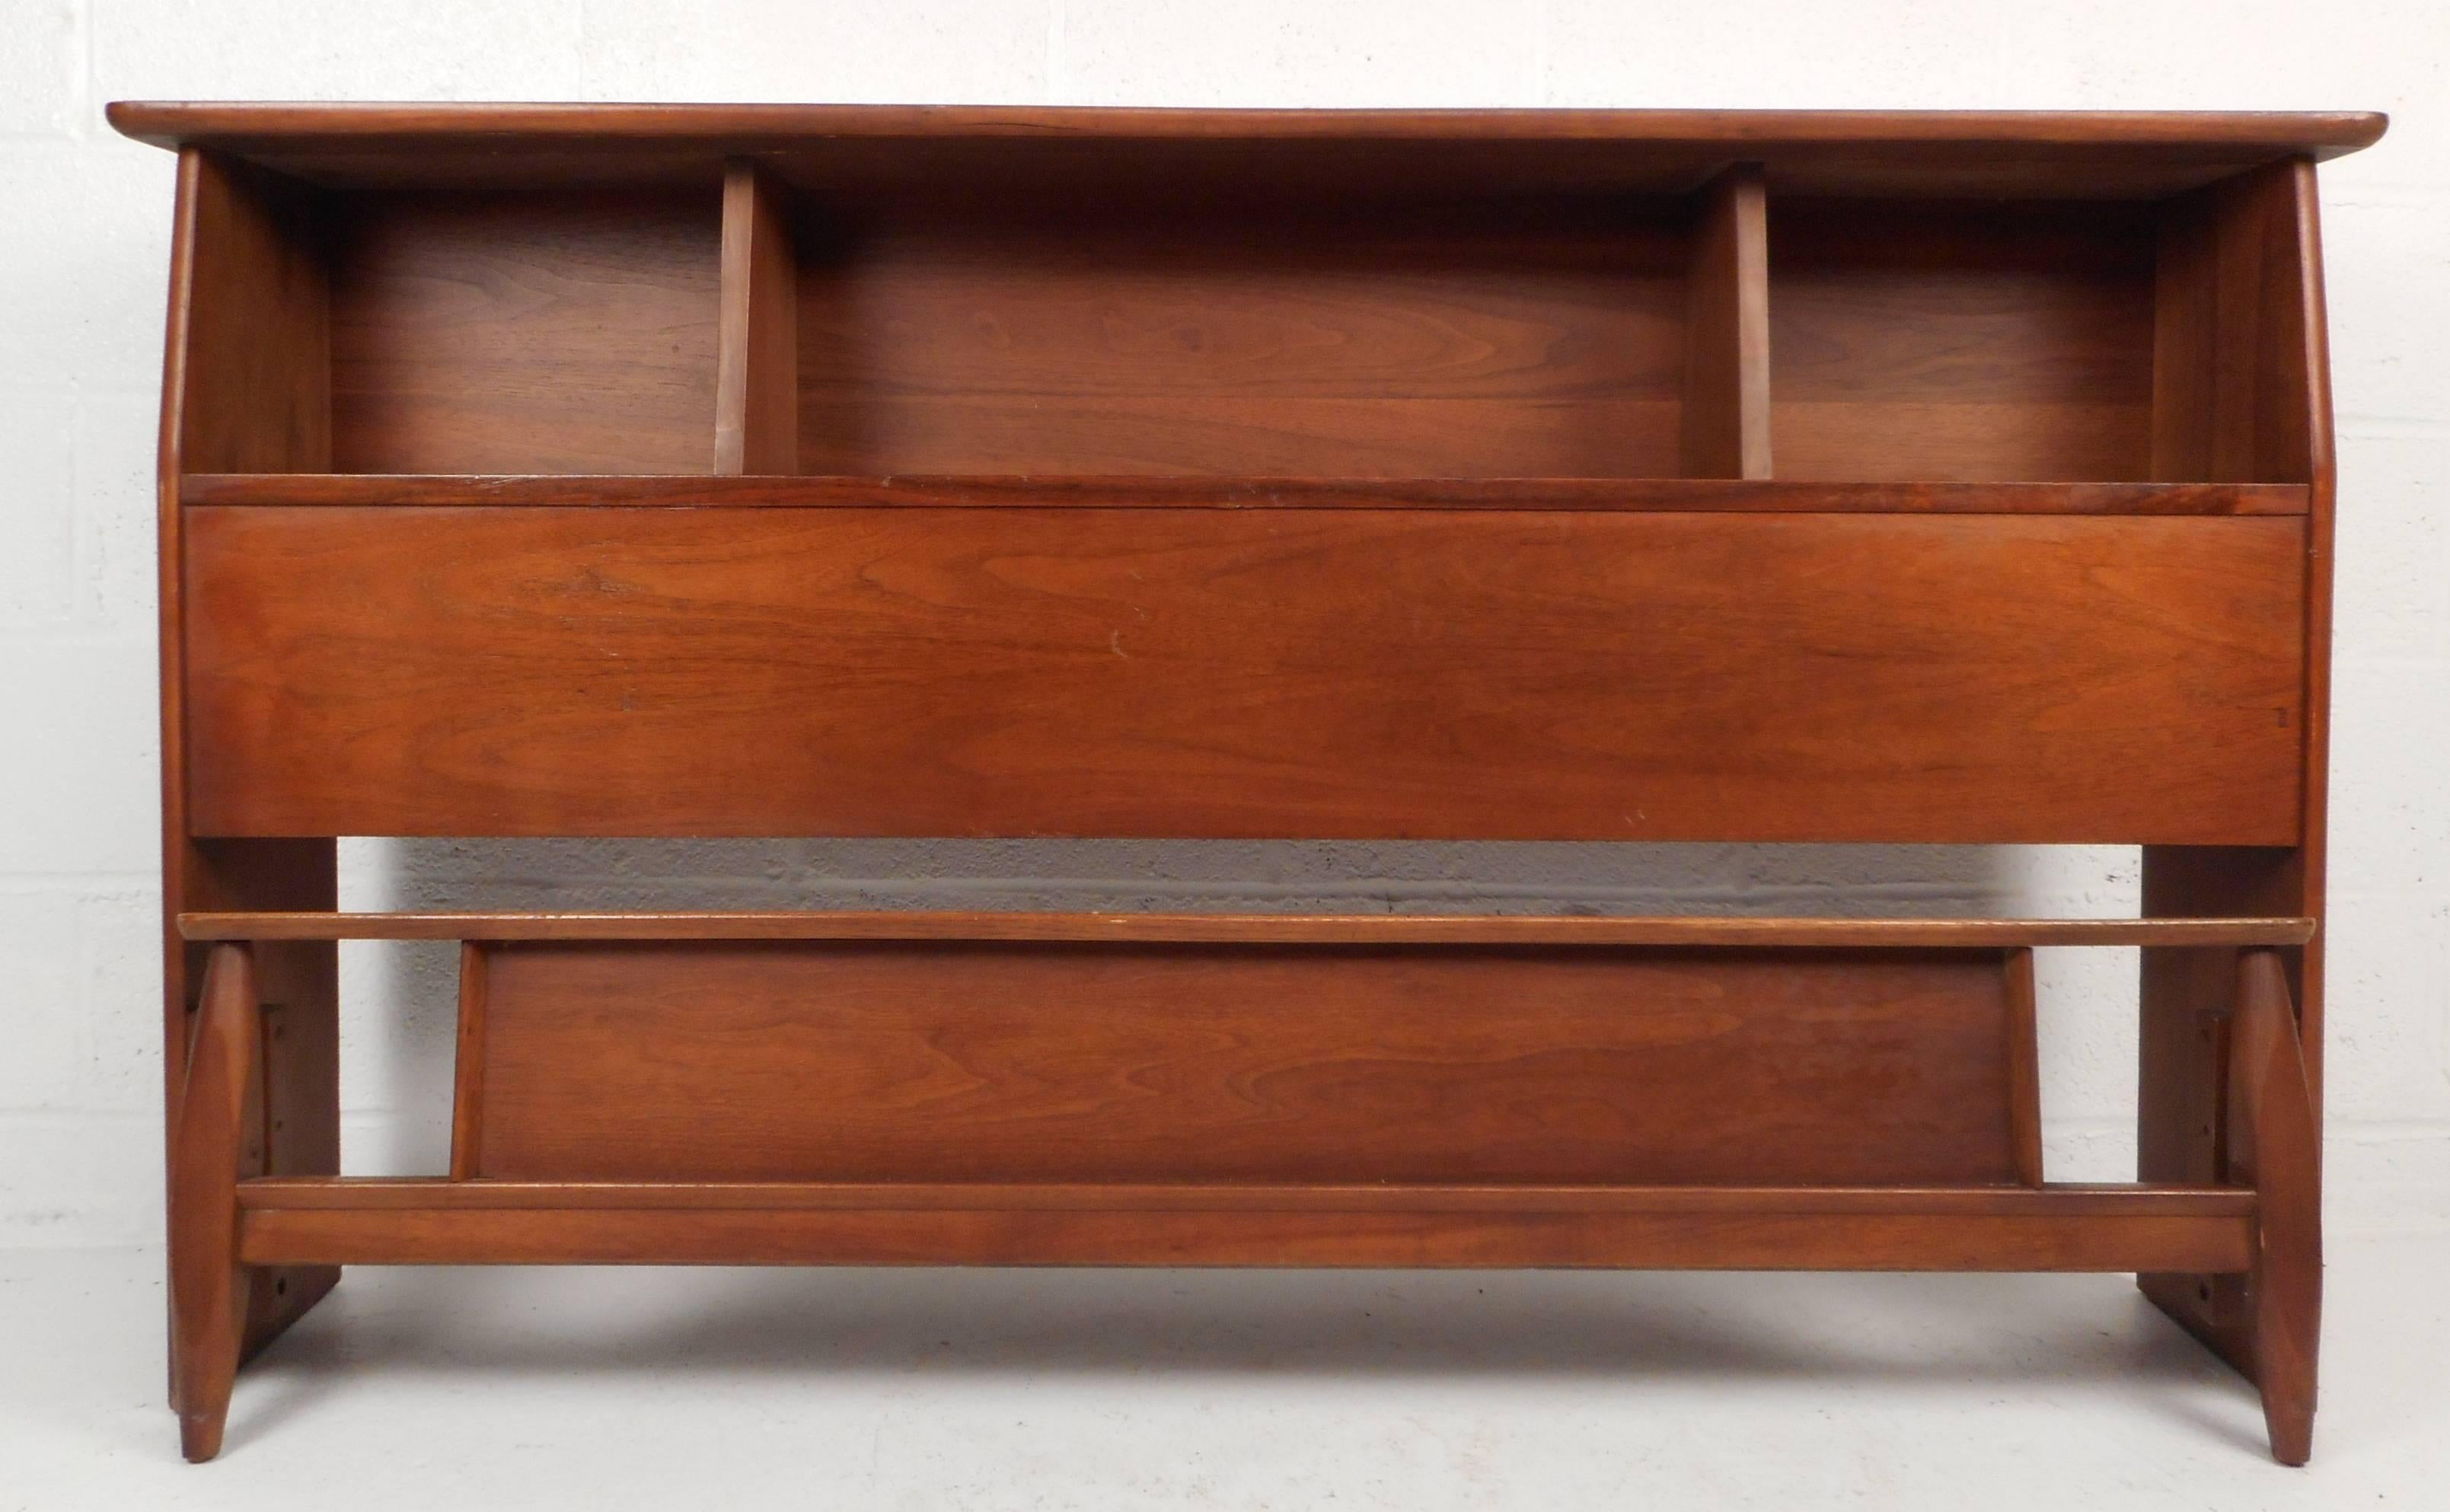 This impressive Mid-Century Modern queen-size headboard and footboard feature a vintage walnut finish. The beautiful headboard offers plenty of room for storage in its three large compartments on top. The sleek top with rounded edges and a footboard